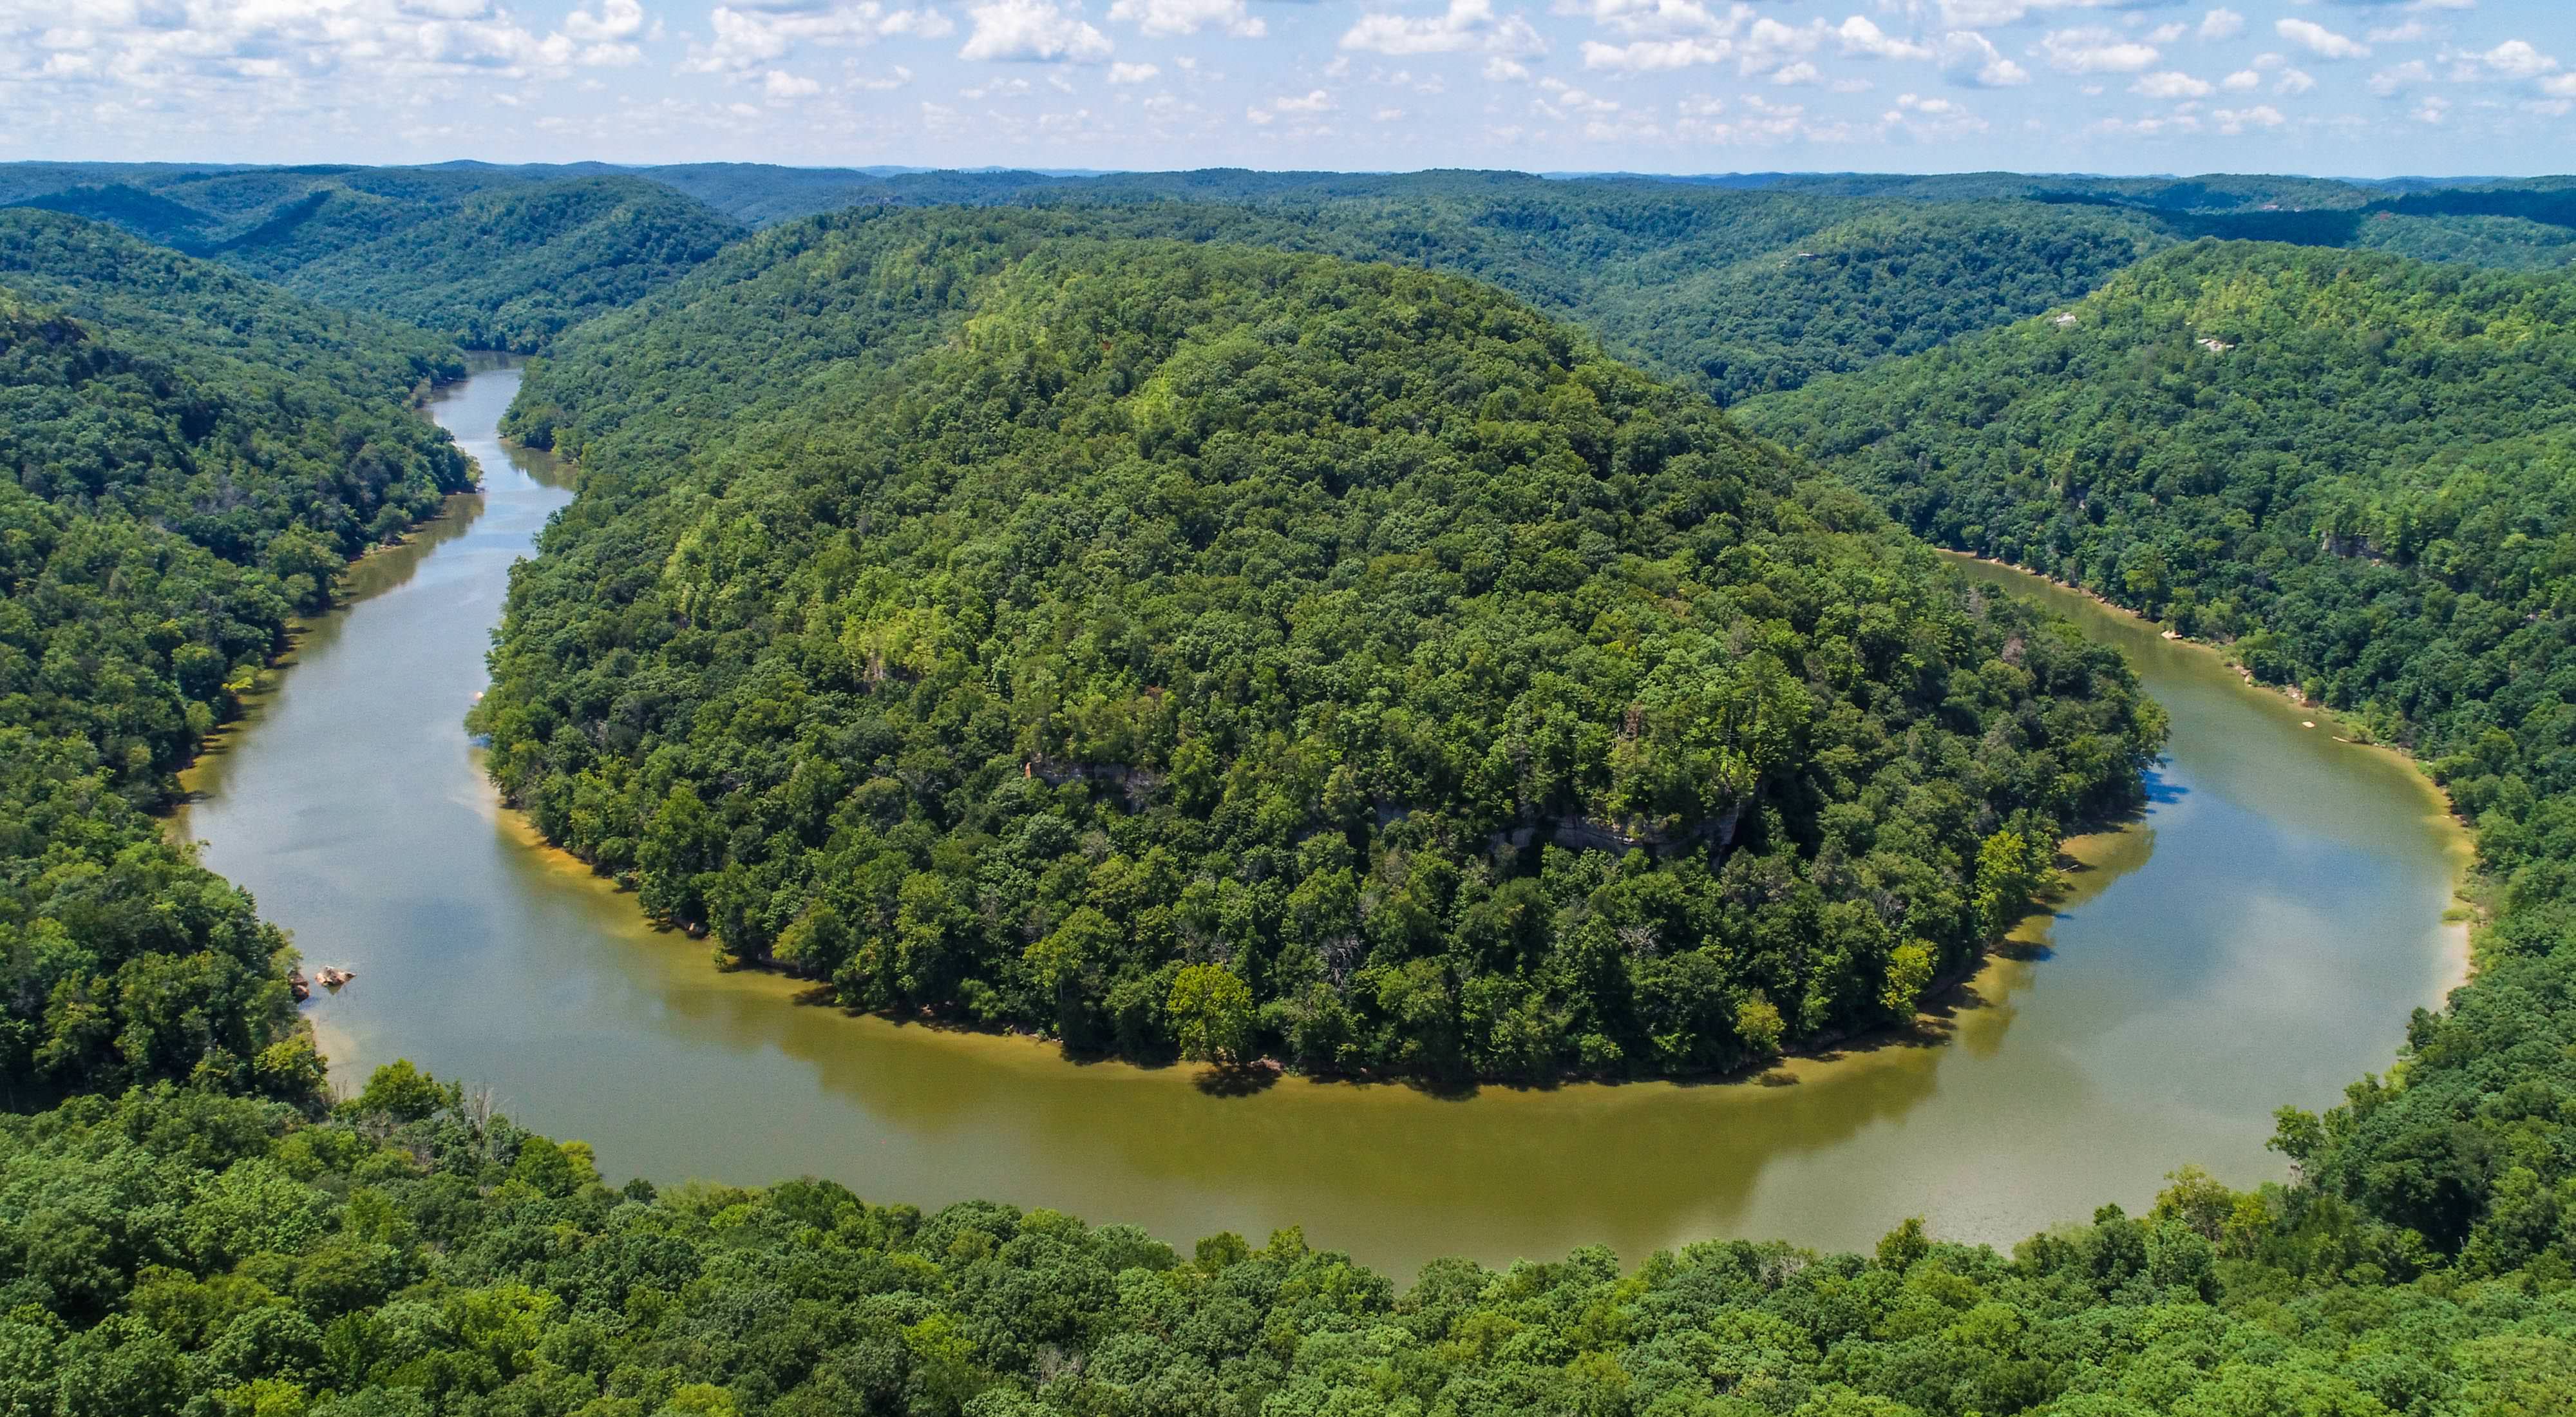 The Big South Fork River meanders through a forest